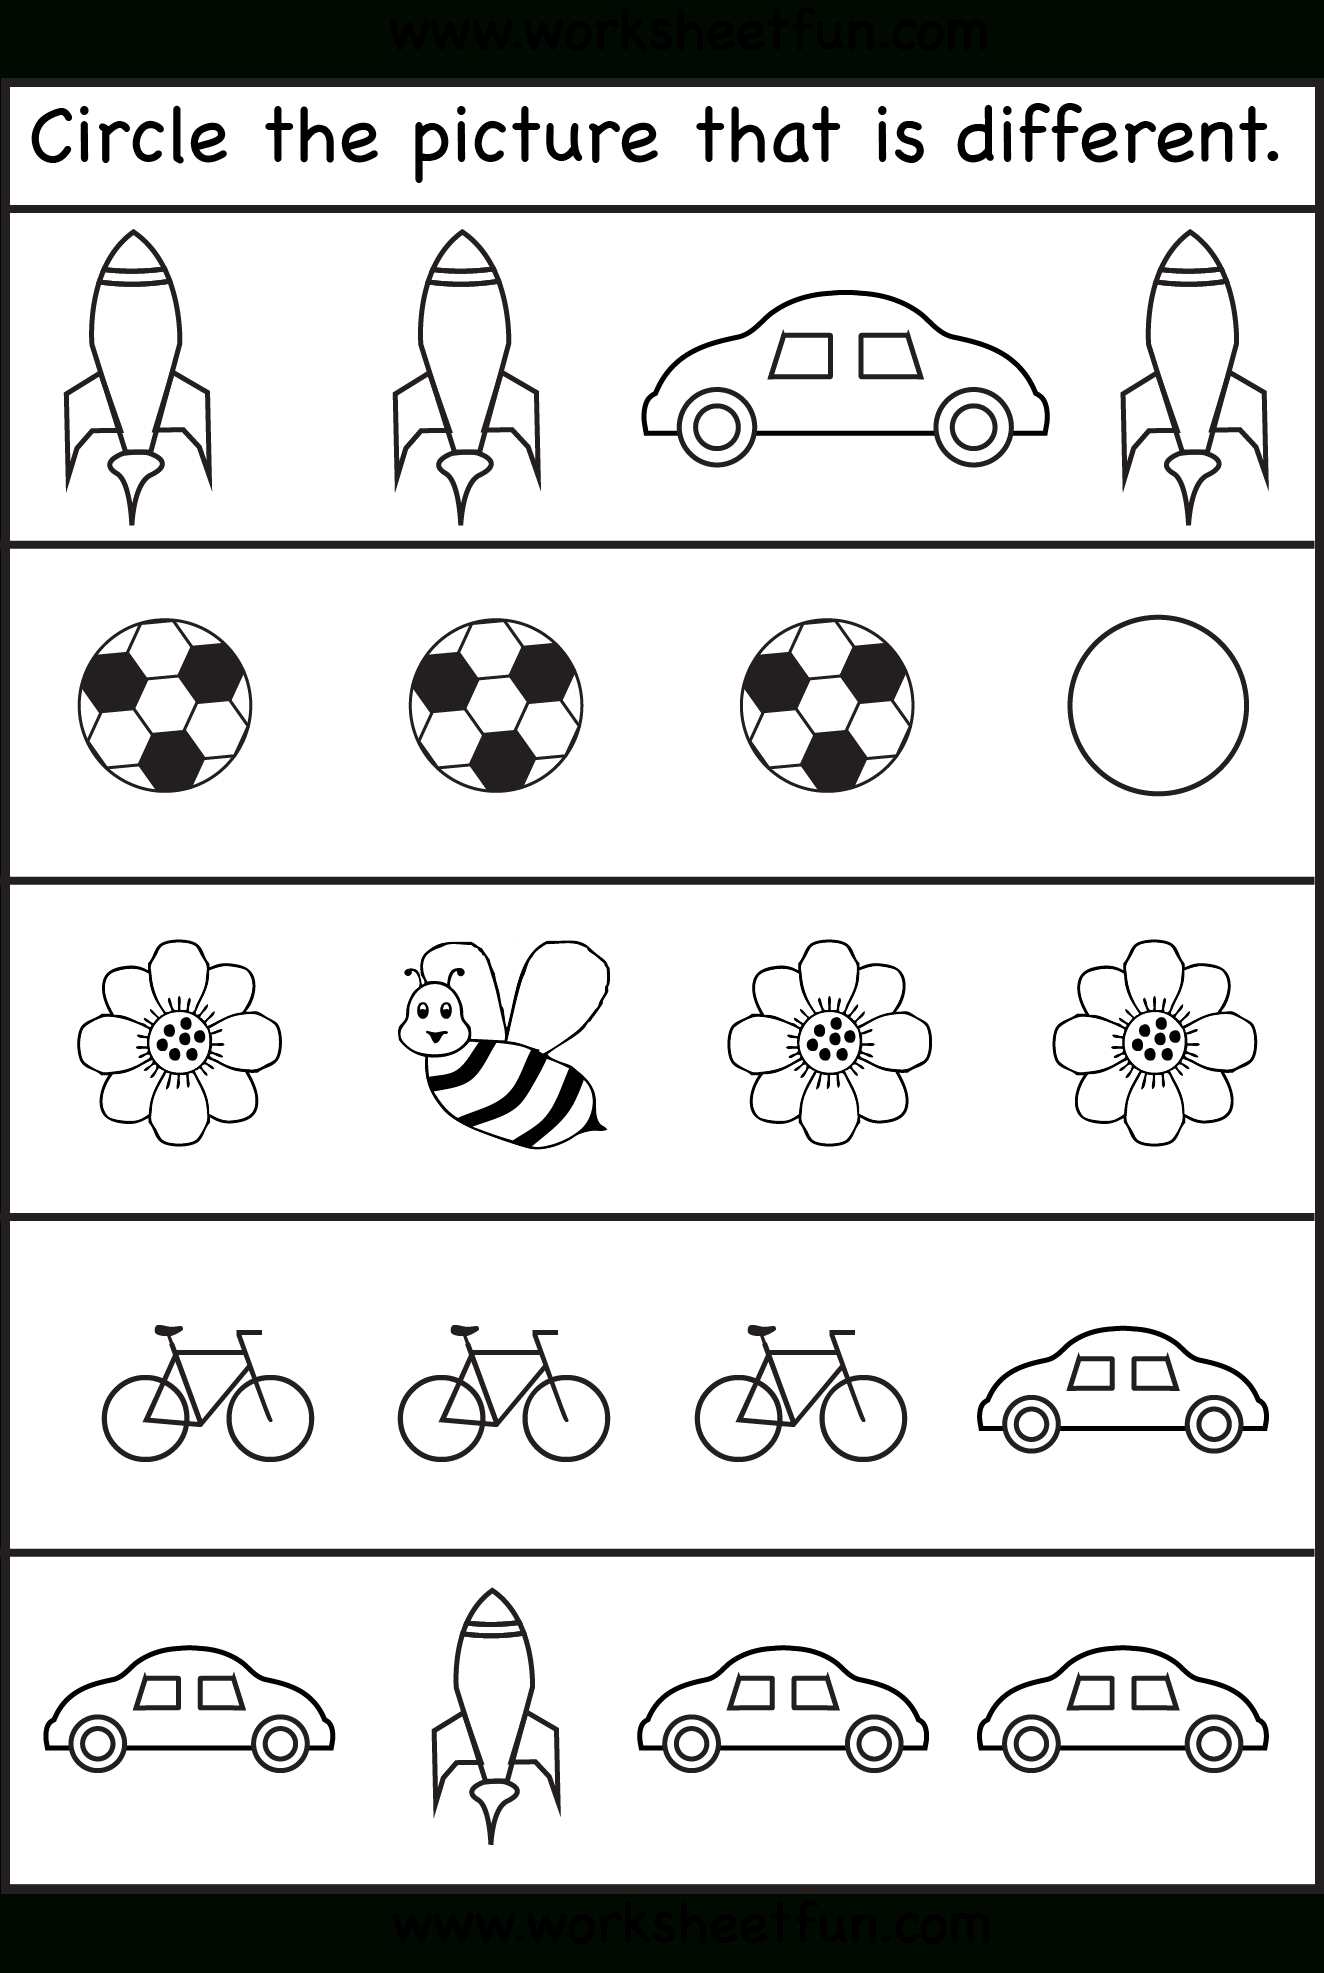 Circle The Picture That Is Different - 4 Worksheets | Preschool Work - Free Printable Same And Different Worksheets